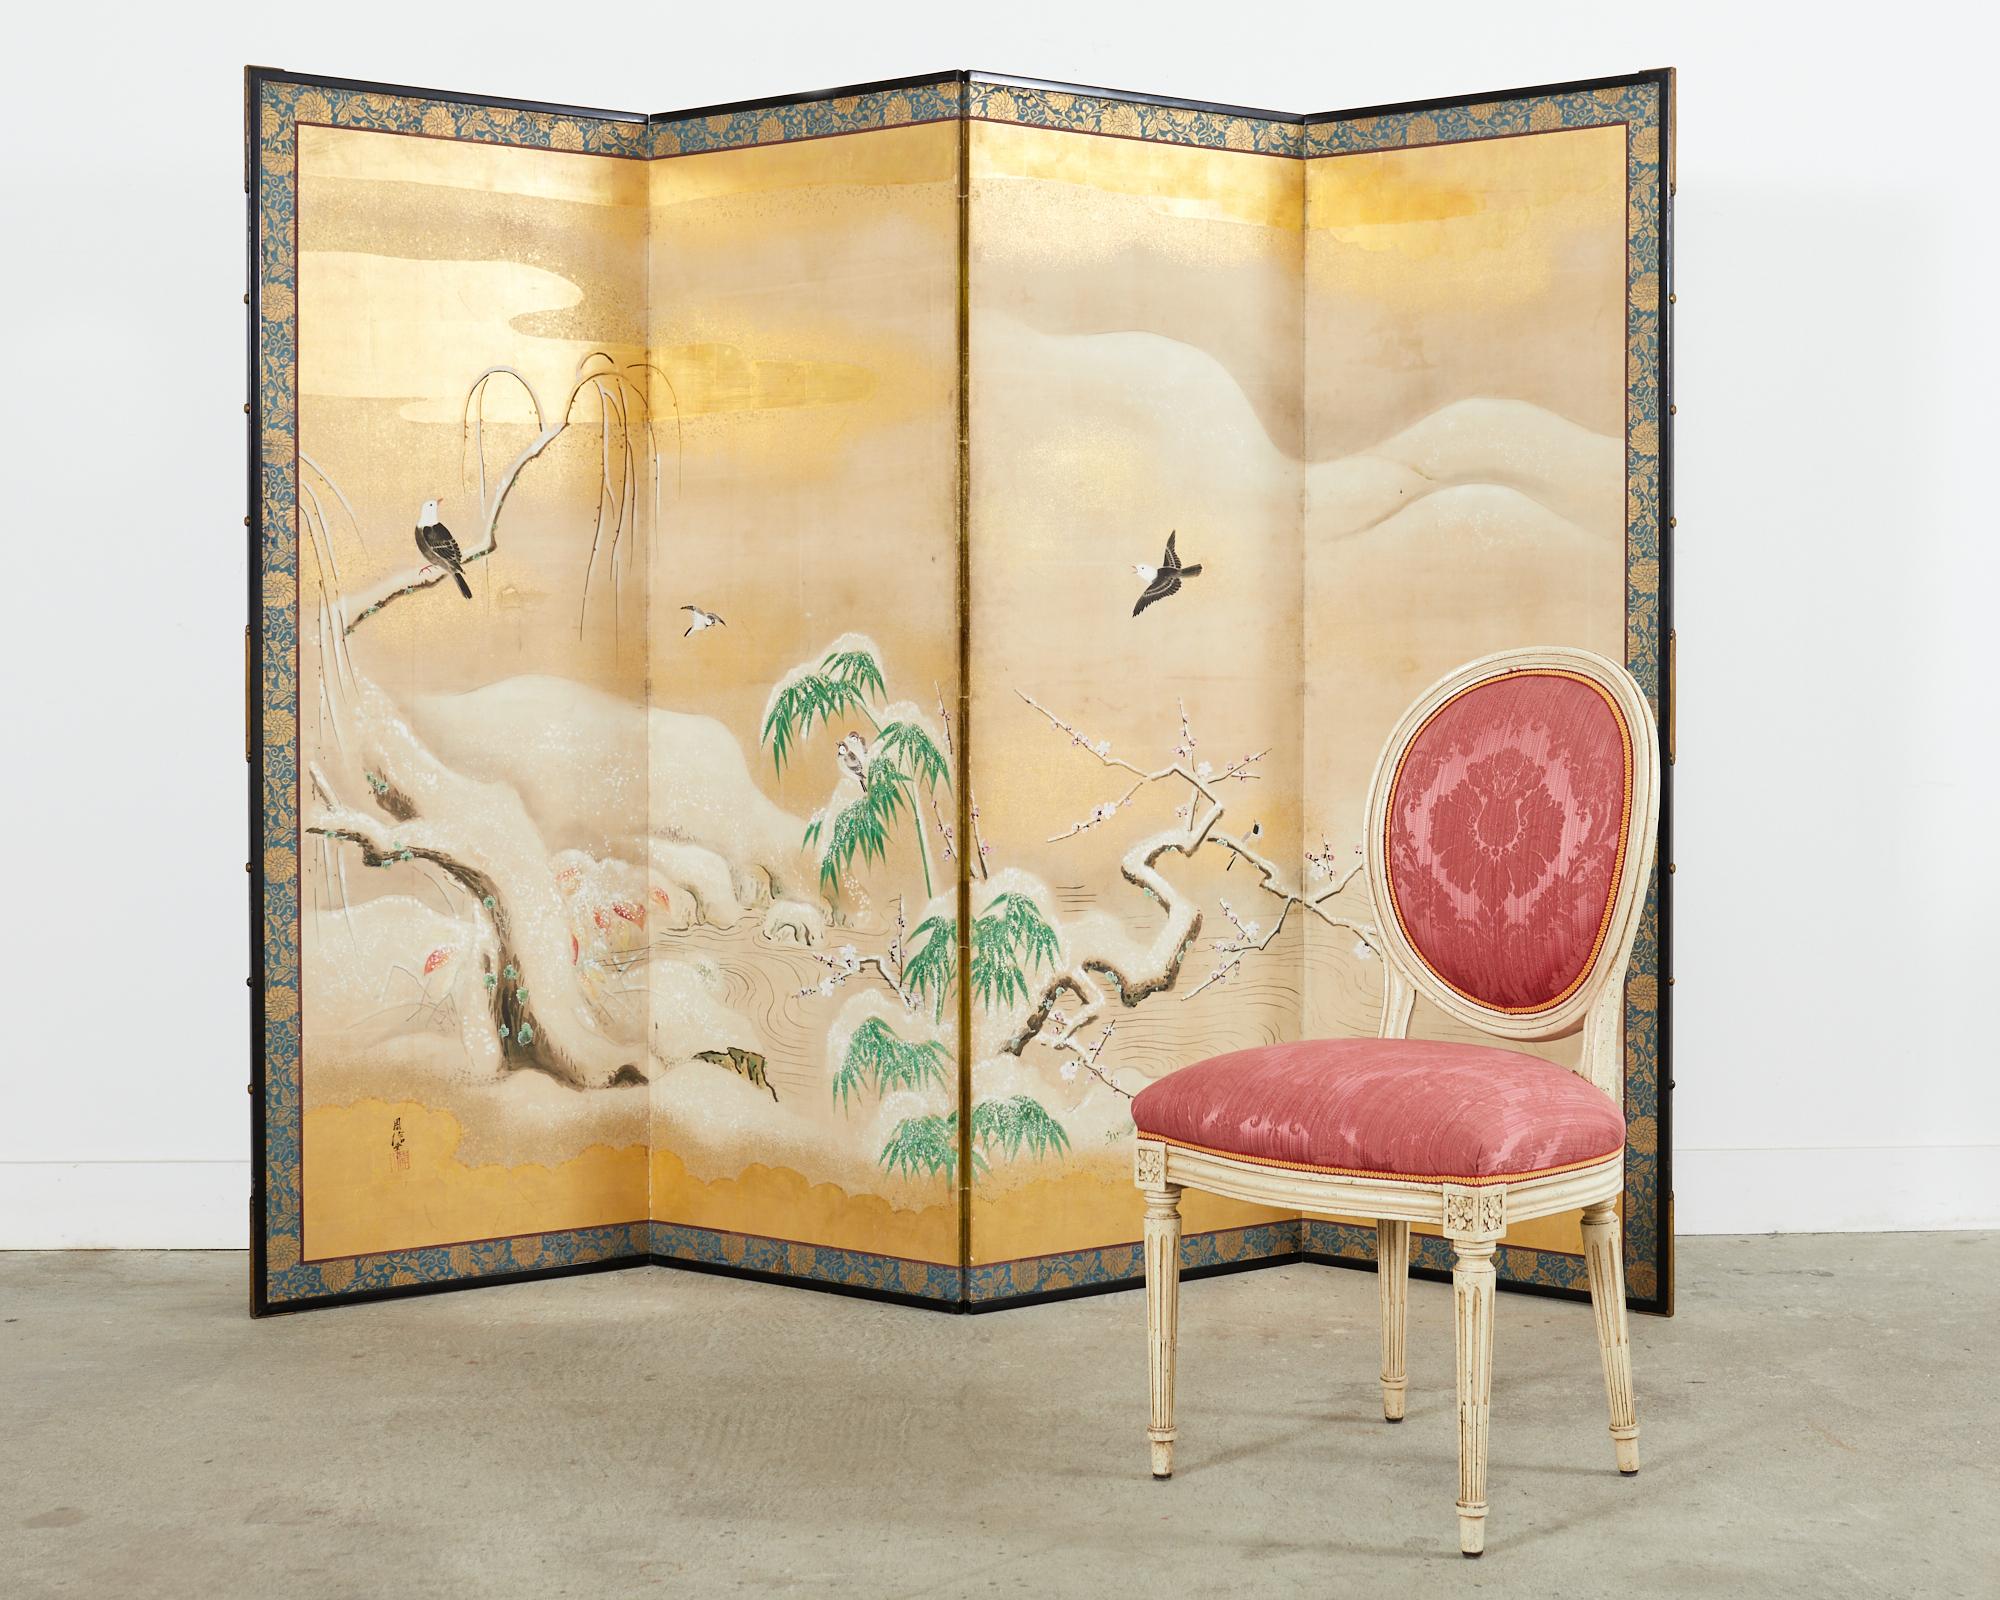 Impressive large scale Japanese Showa period four panel byobu screen depicting a serene snowy winter landscape with willow, prunus, and bamboo. The screen features an amazing background of gold leaf clouds and gold leaf specks. Vibrant ink and